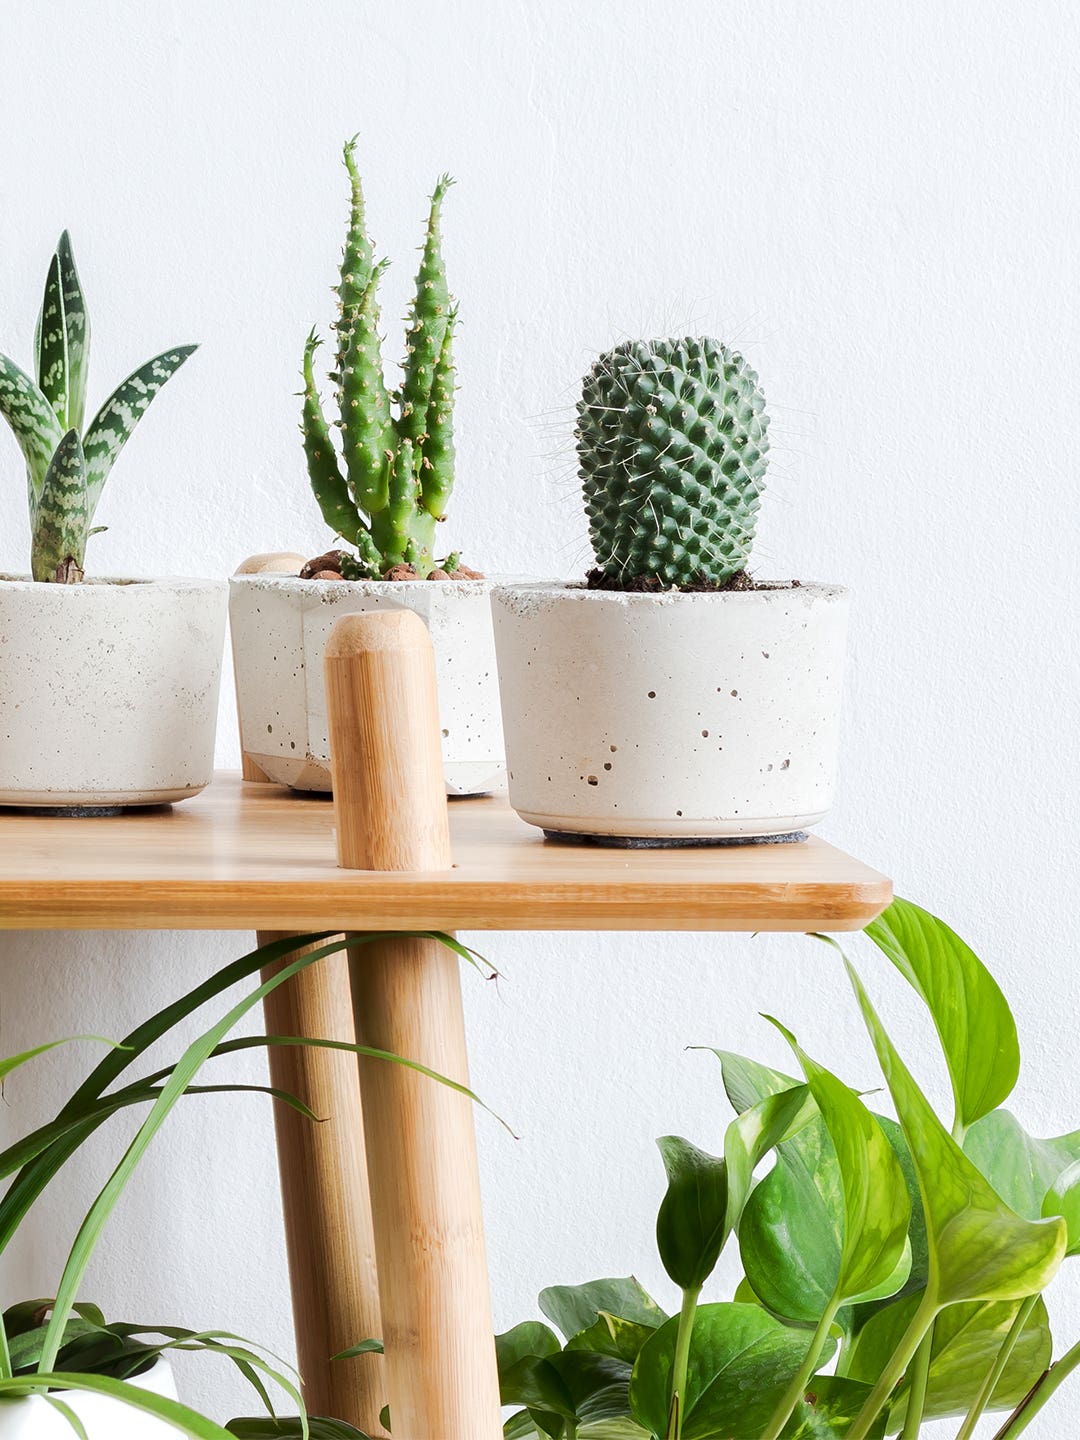 How to Grow Your Very Own Cactus, According to a Plant Pro